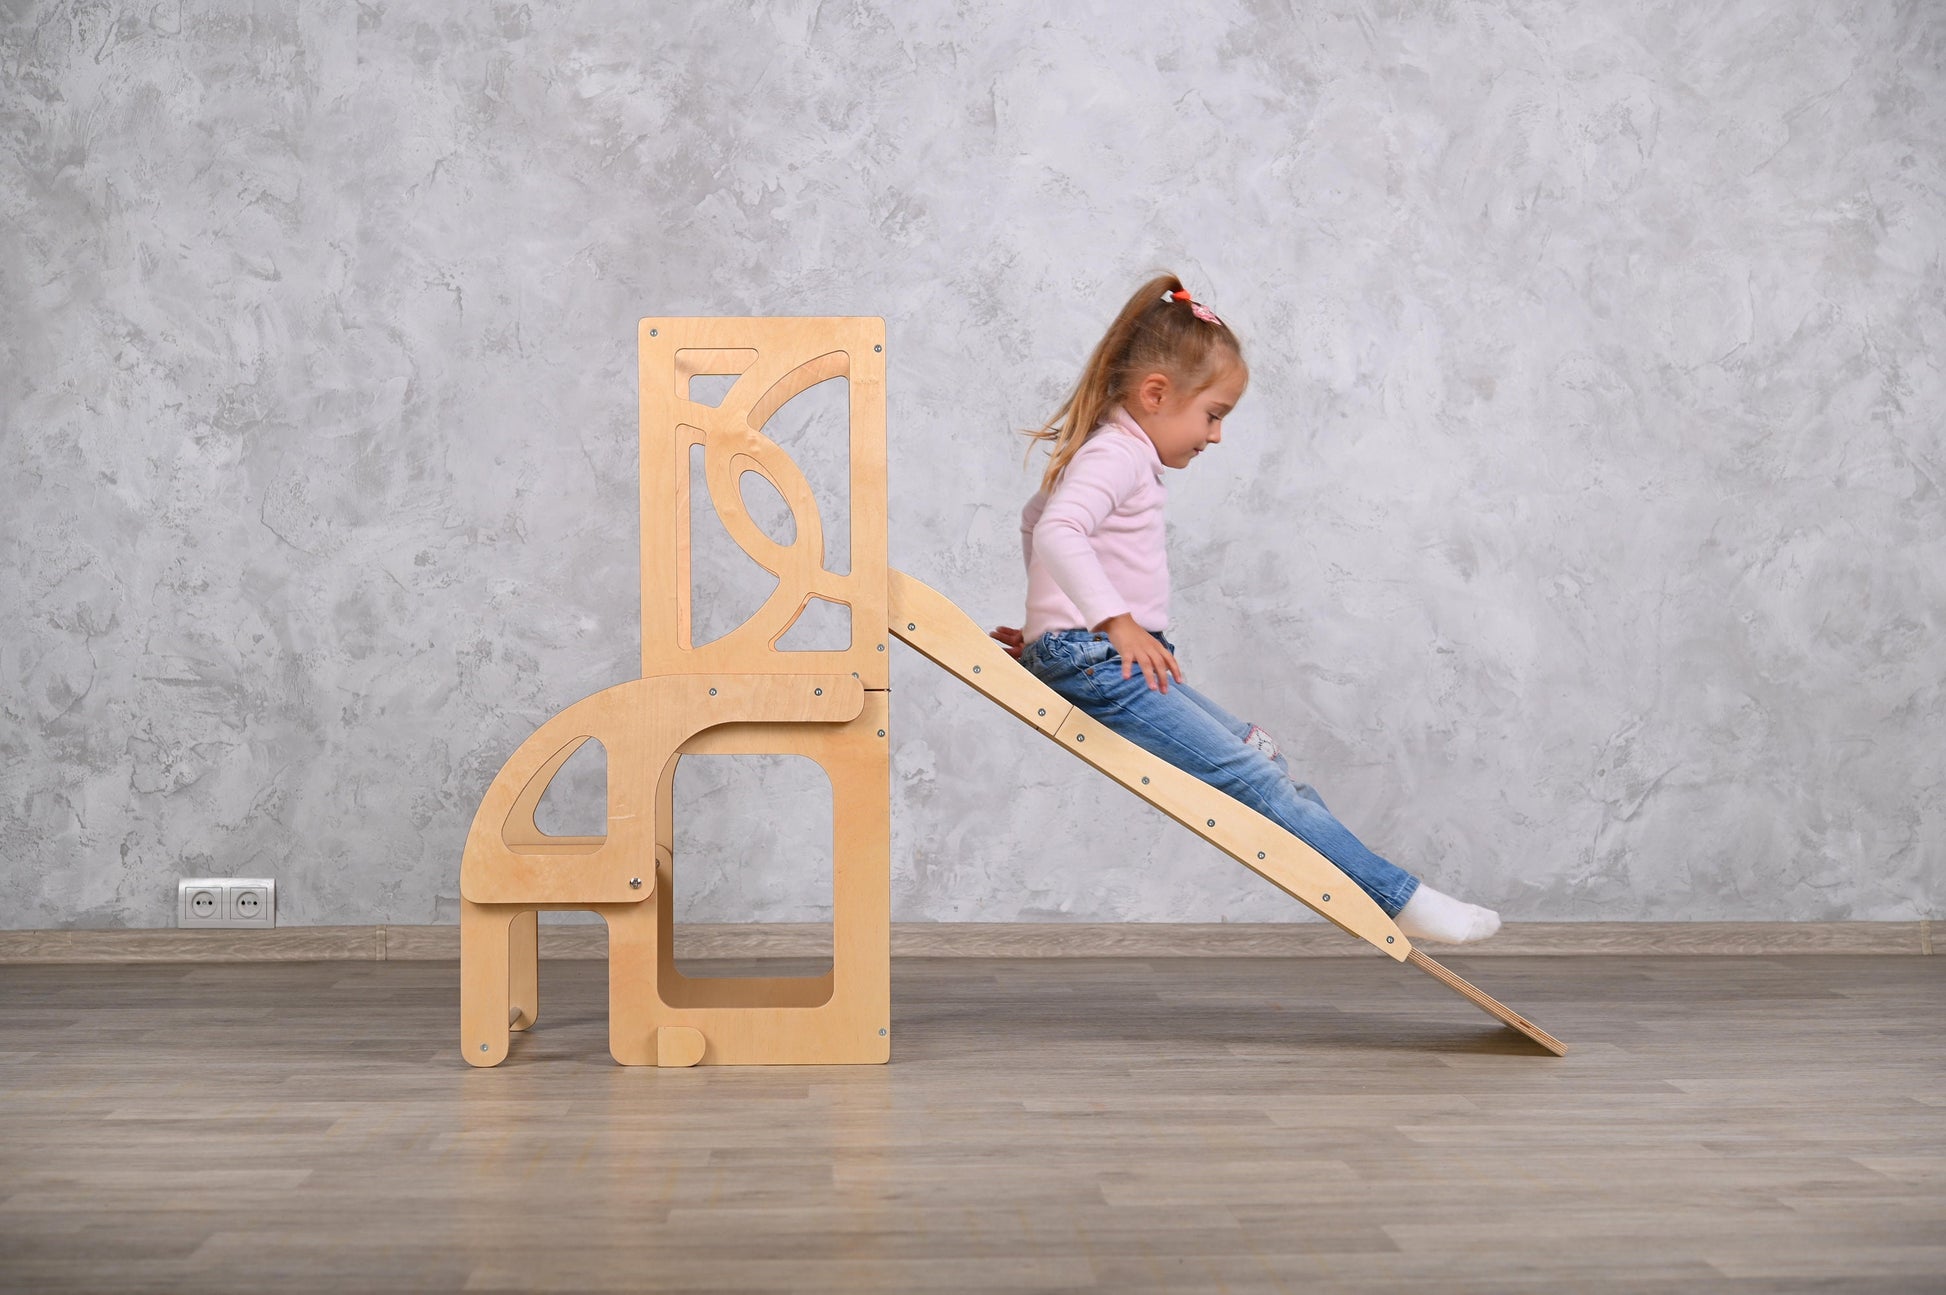 Gray Convertible learning toddler tower & table WITH BACK - listing for Kayan